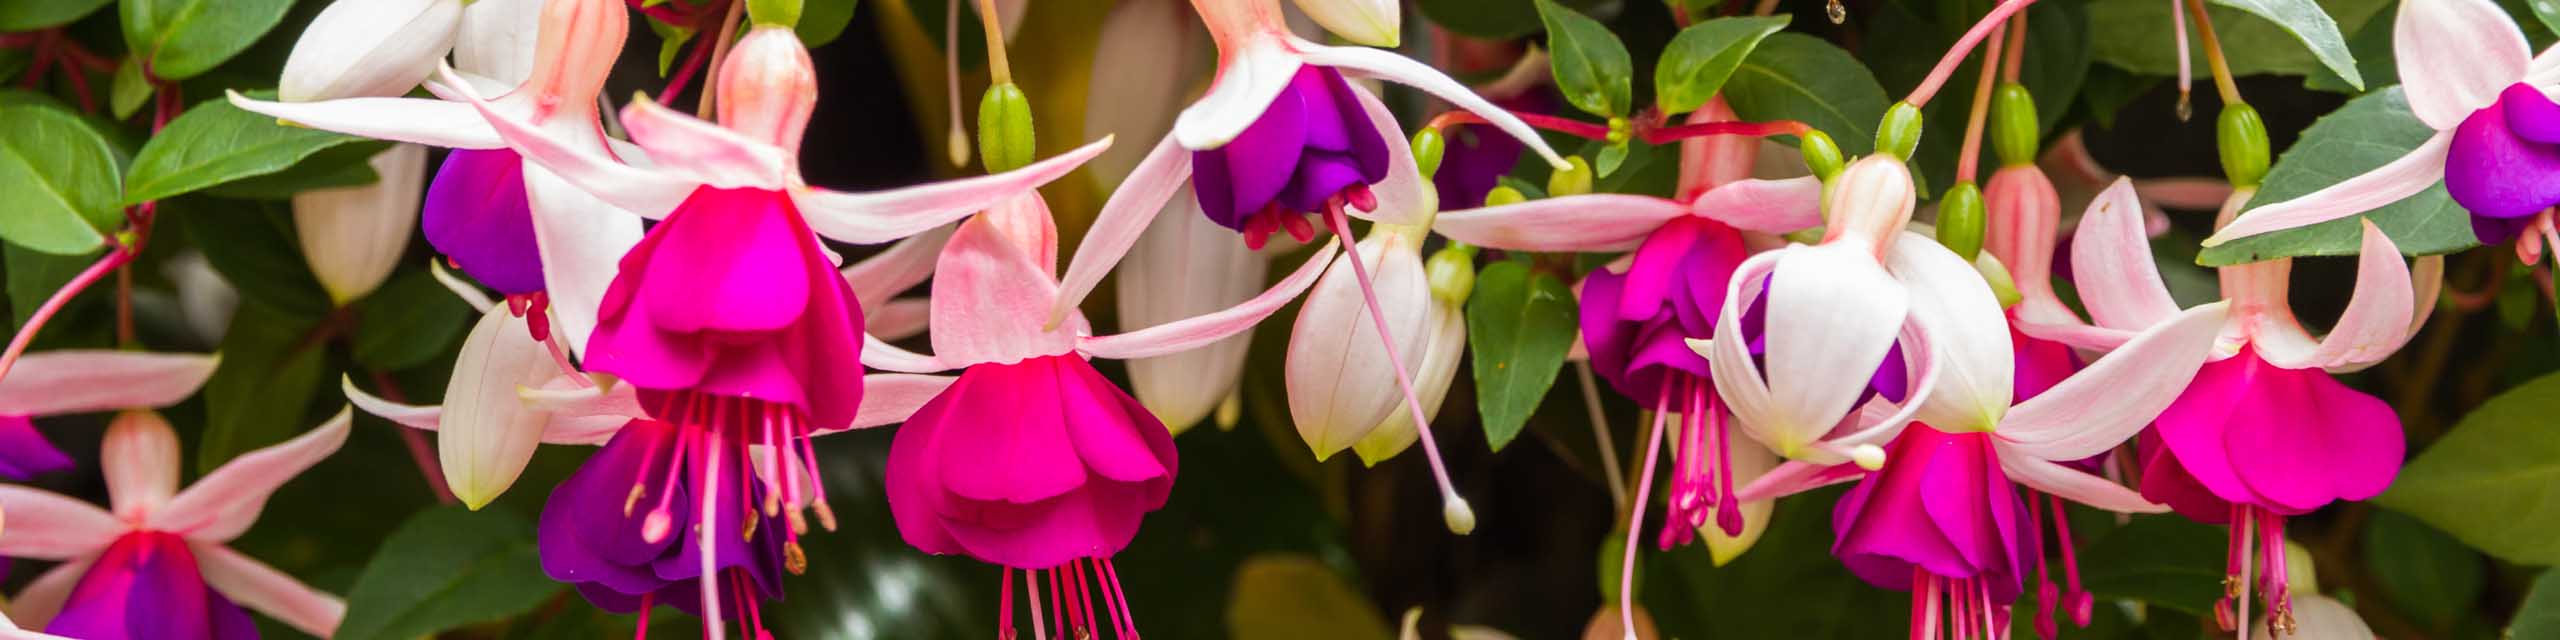 Close up of white and purple fuchsia flowers in bloom.